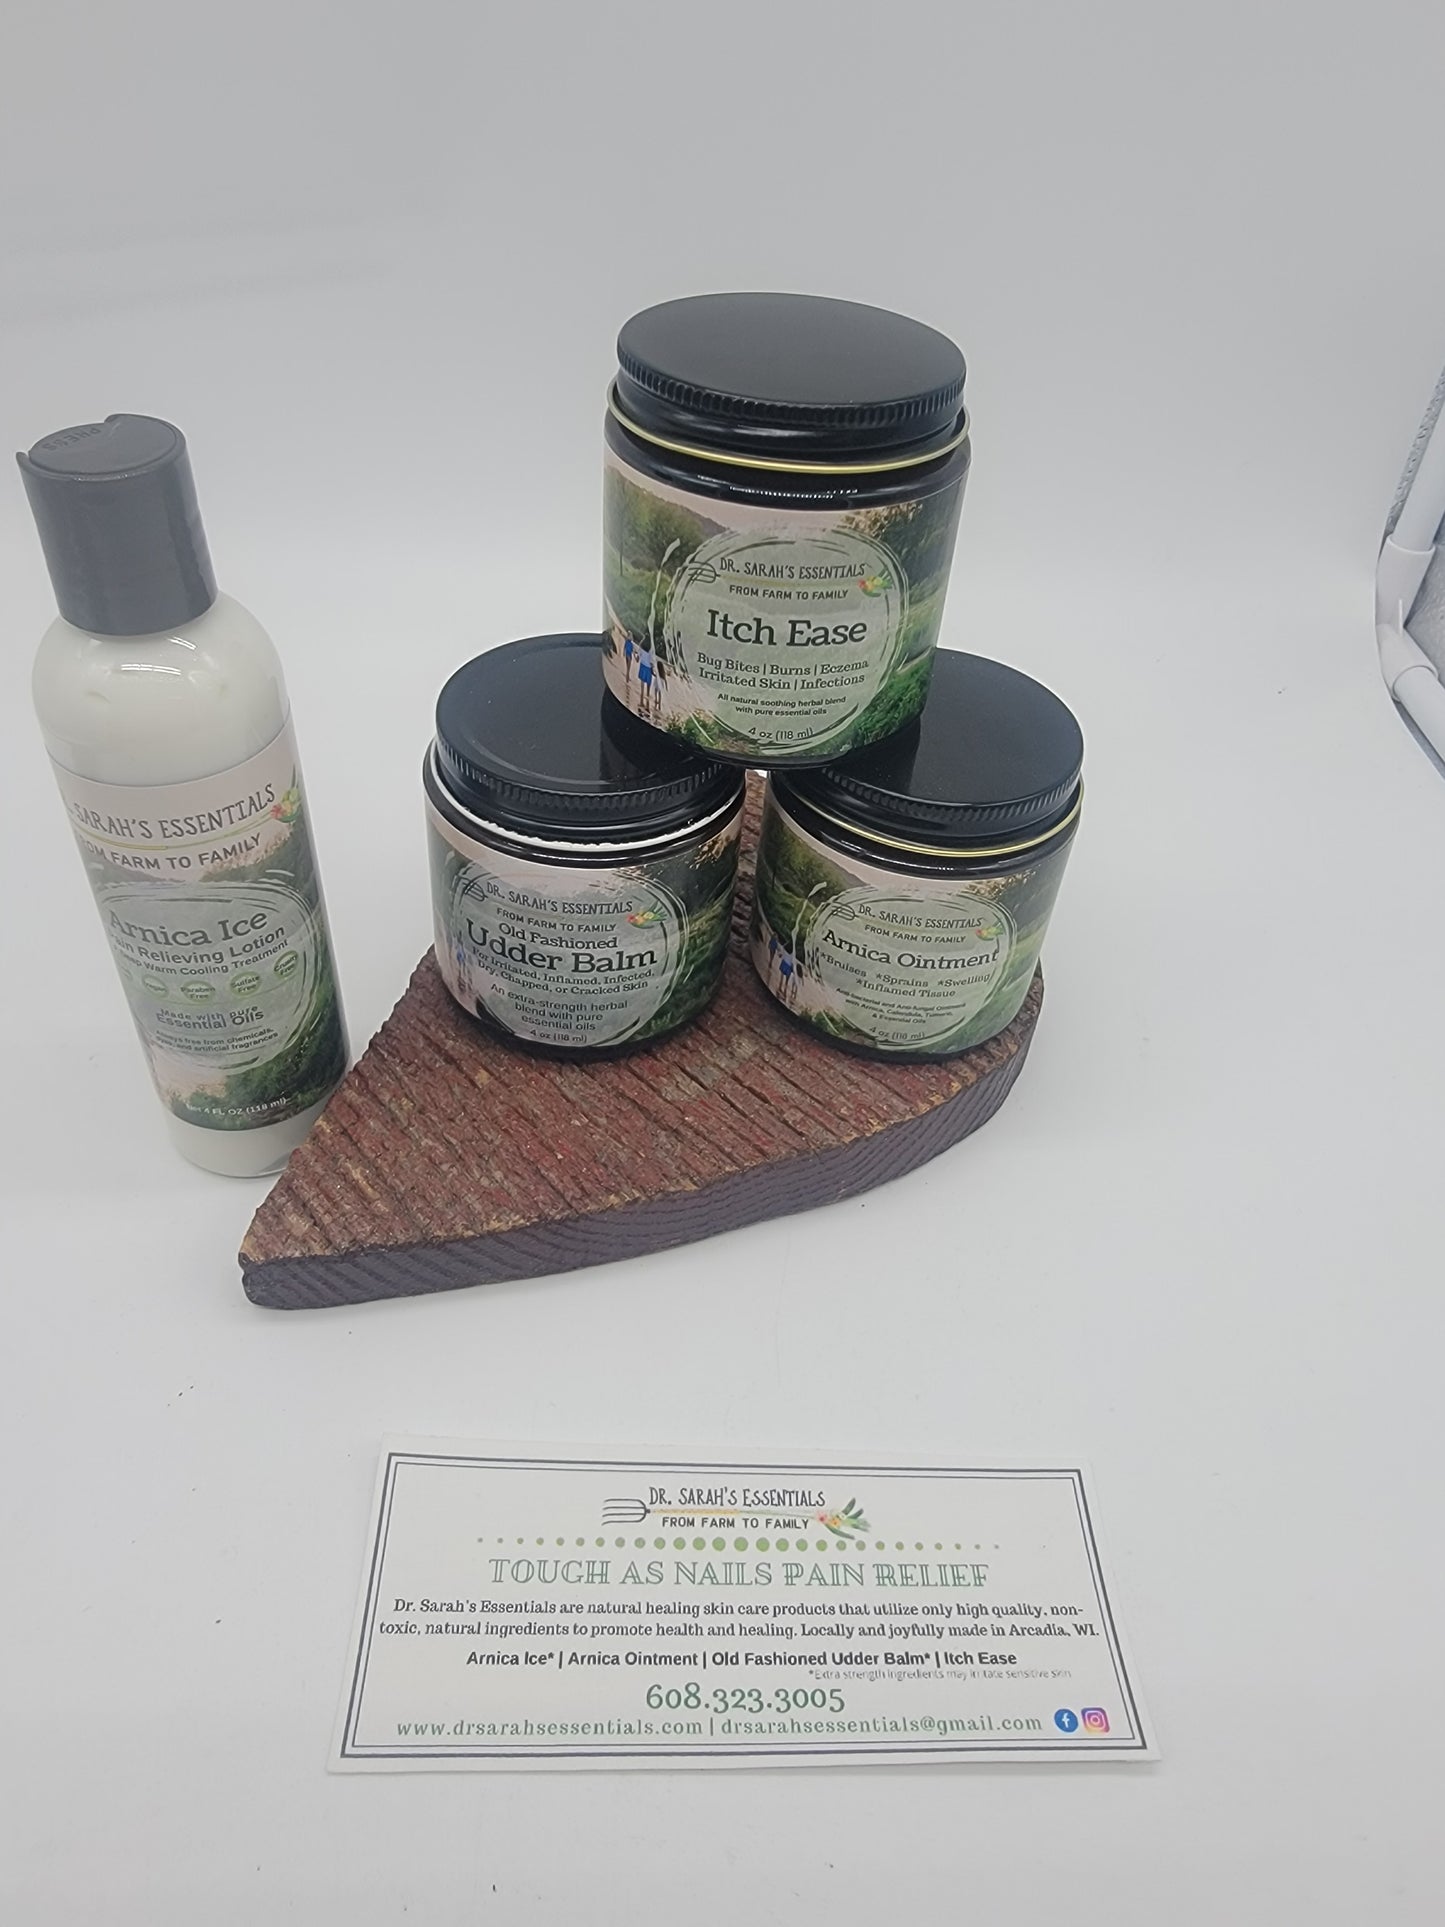 Tough as Nails Pain Relief Gift Set